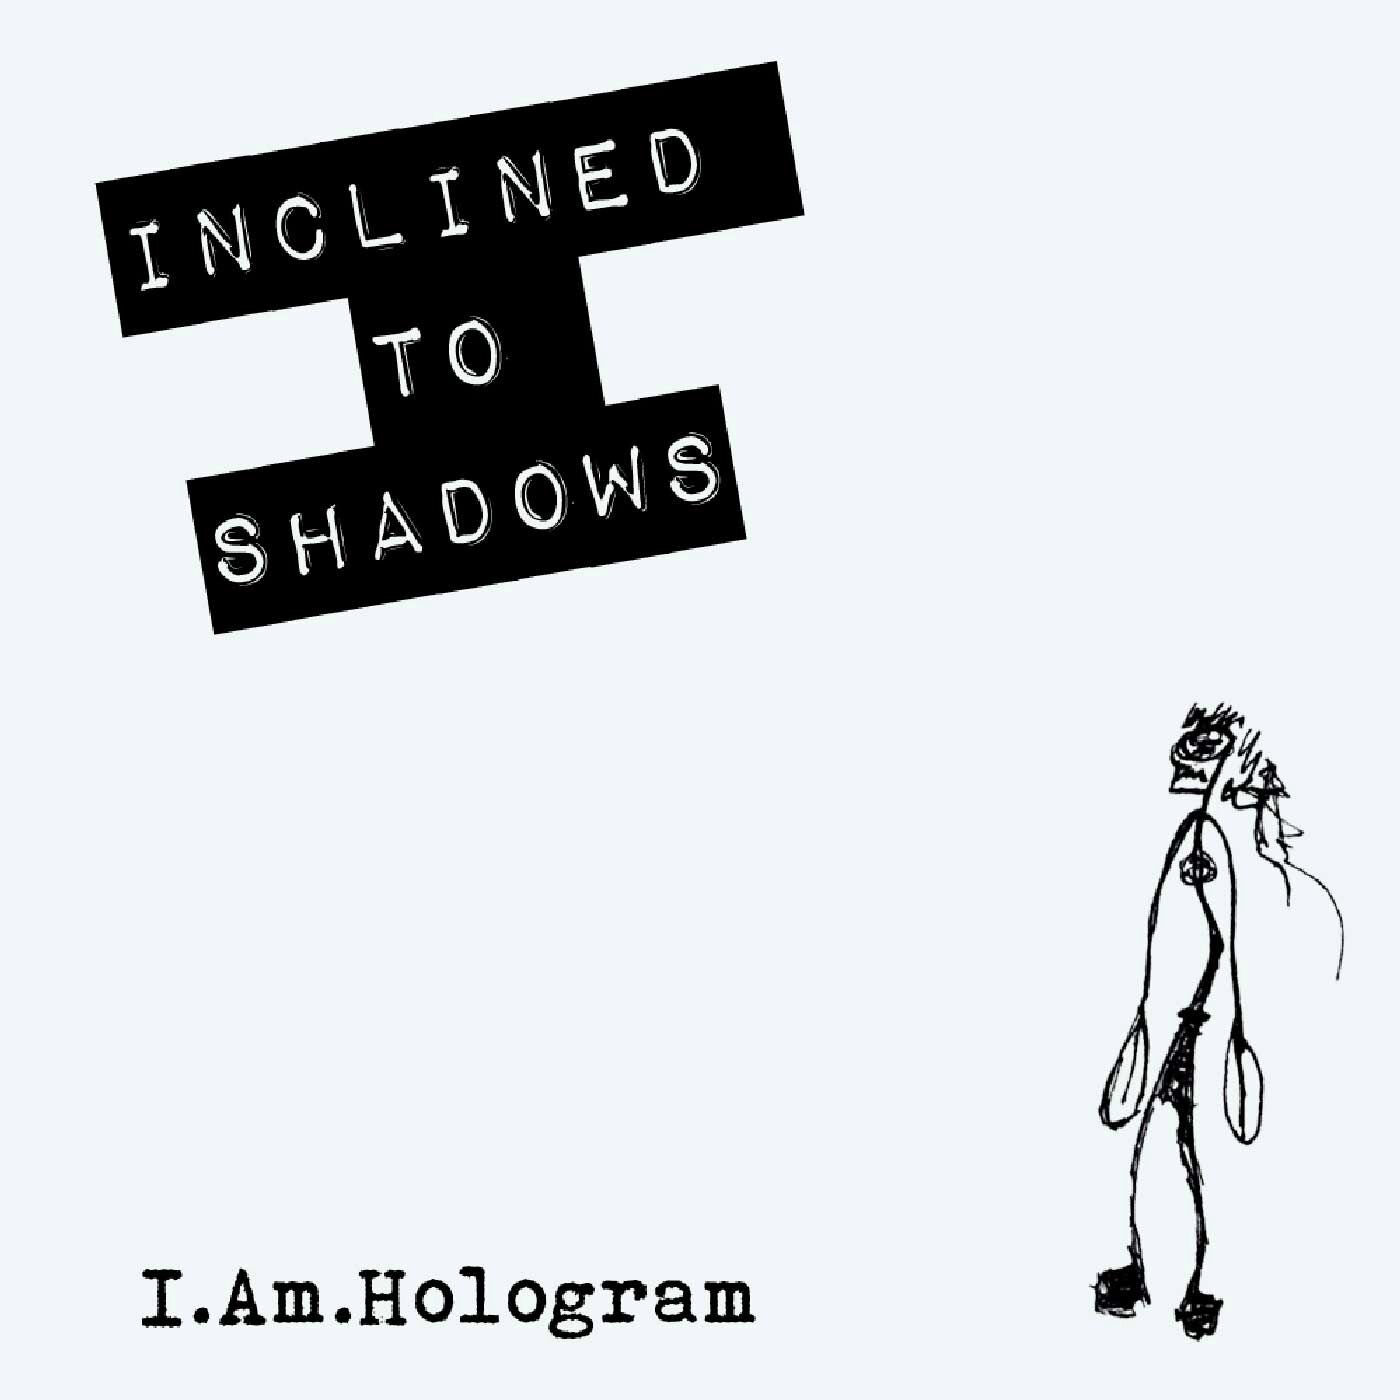 I am starting to add info &amp; lyrics to the music section on my website. Read the lyrics, learn more about where I Am Hologram comes from, download past records for free. This is one of my first releases, Inclined To Shadows. A 2 song EP that came 